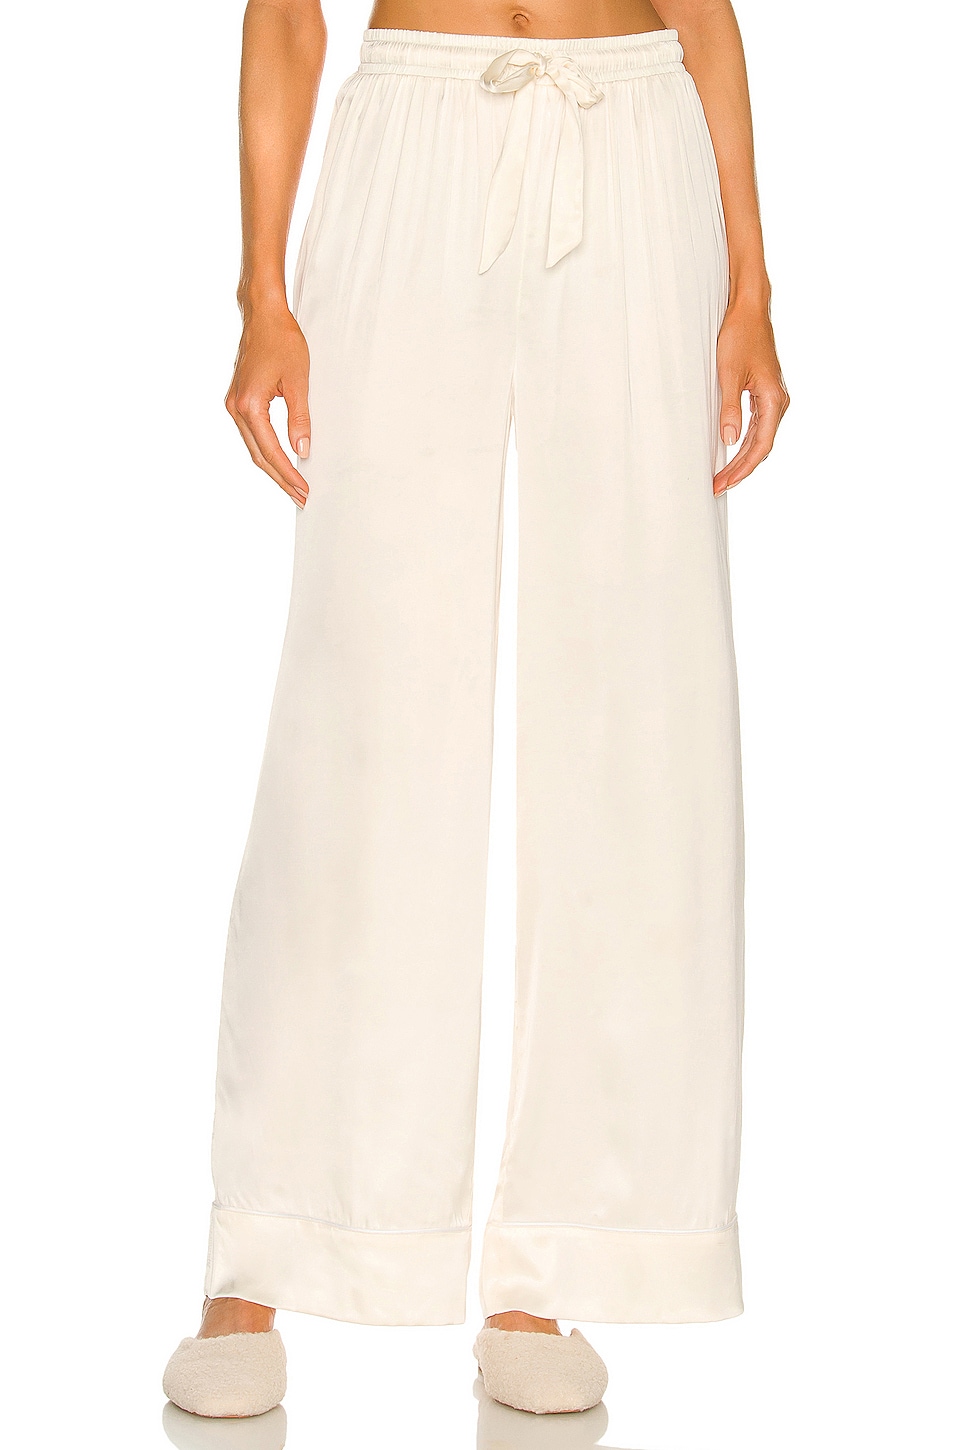 Privacy Please Corinne Pant in Ivory | REVOLVE